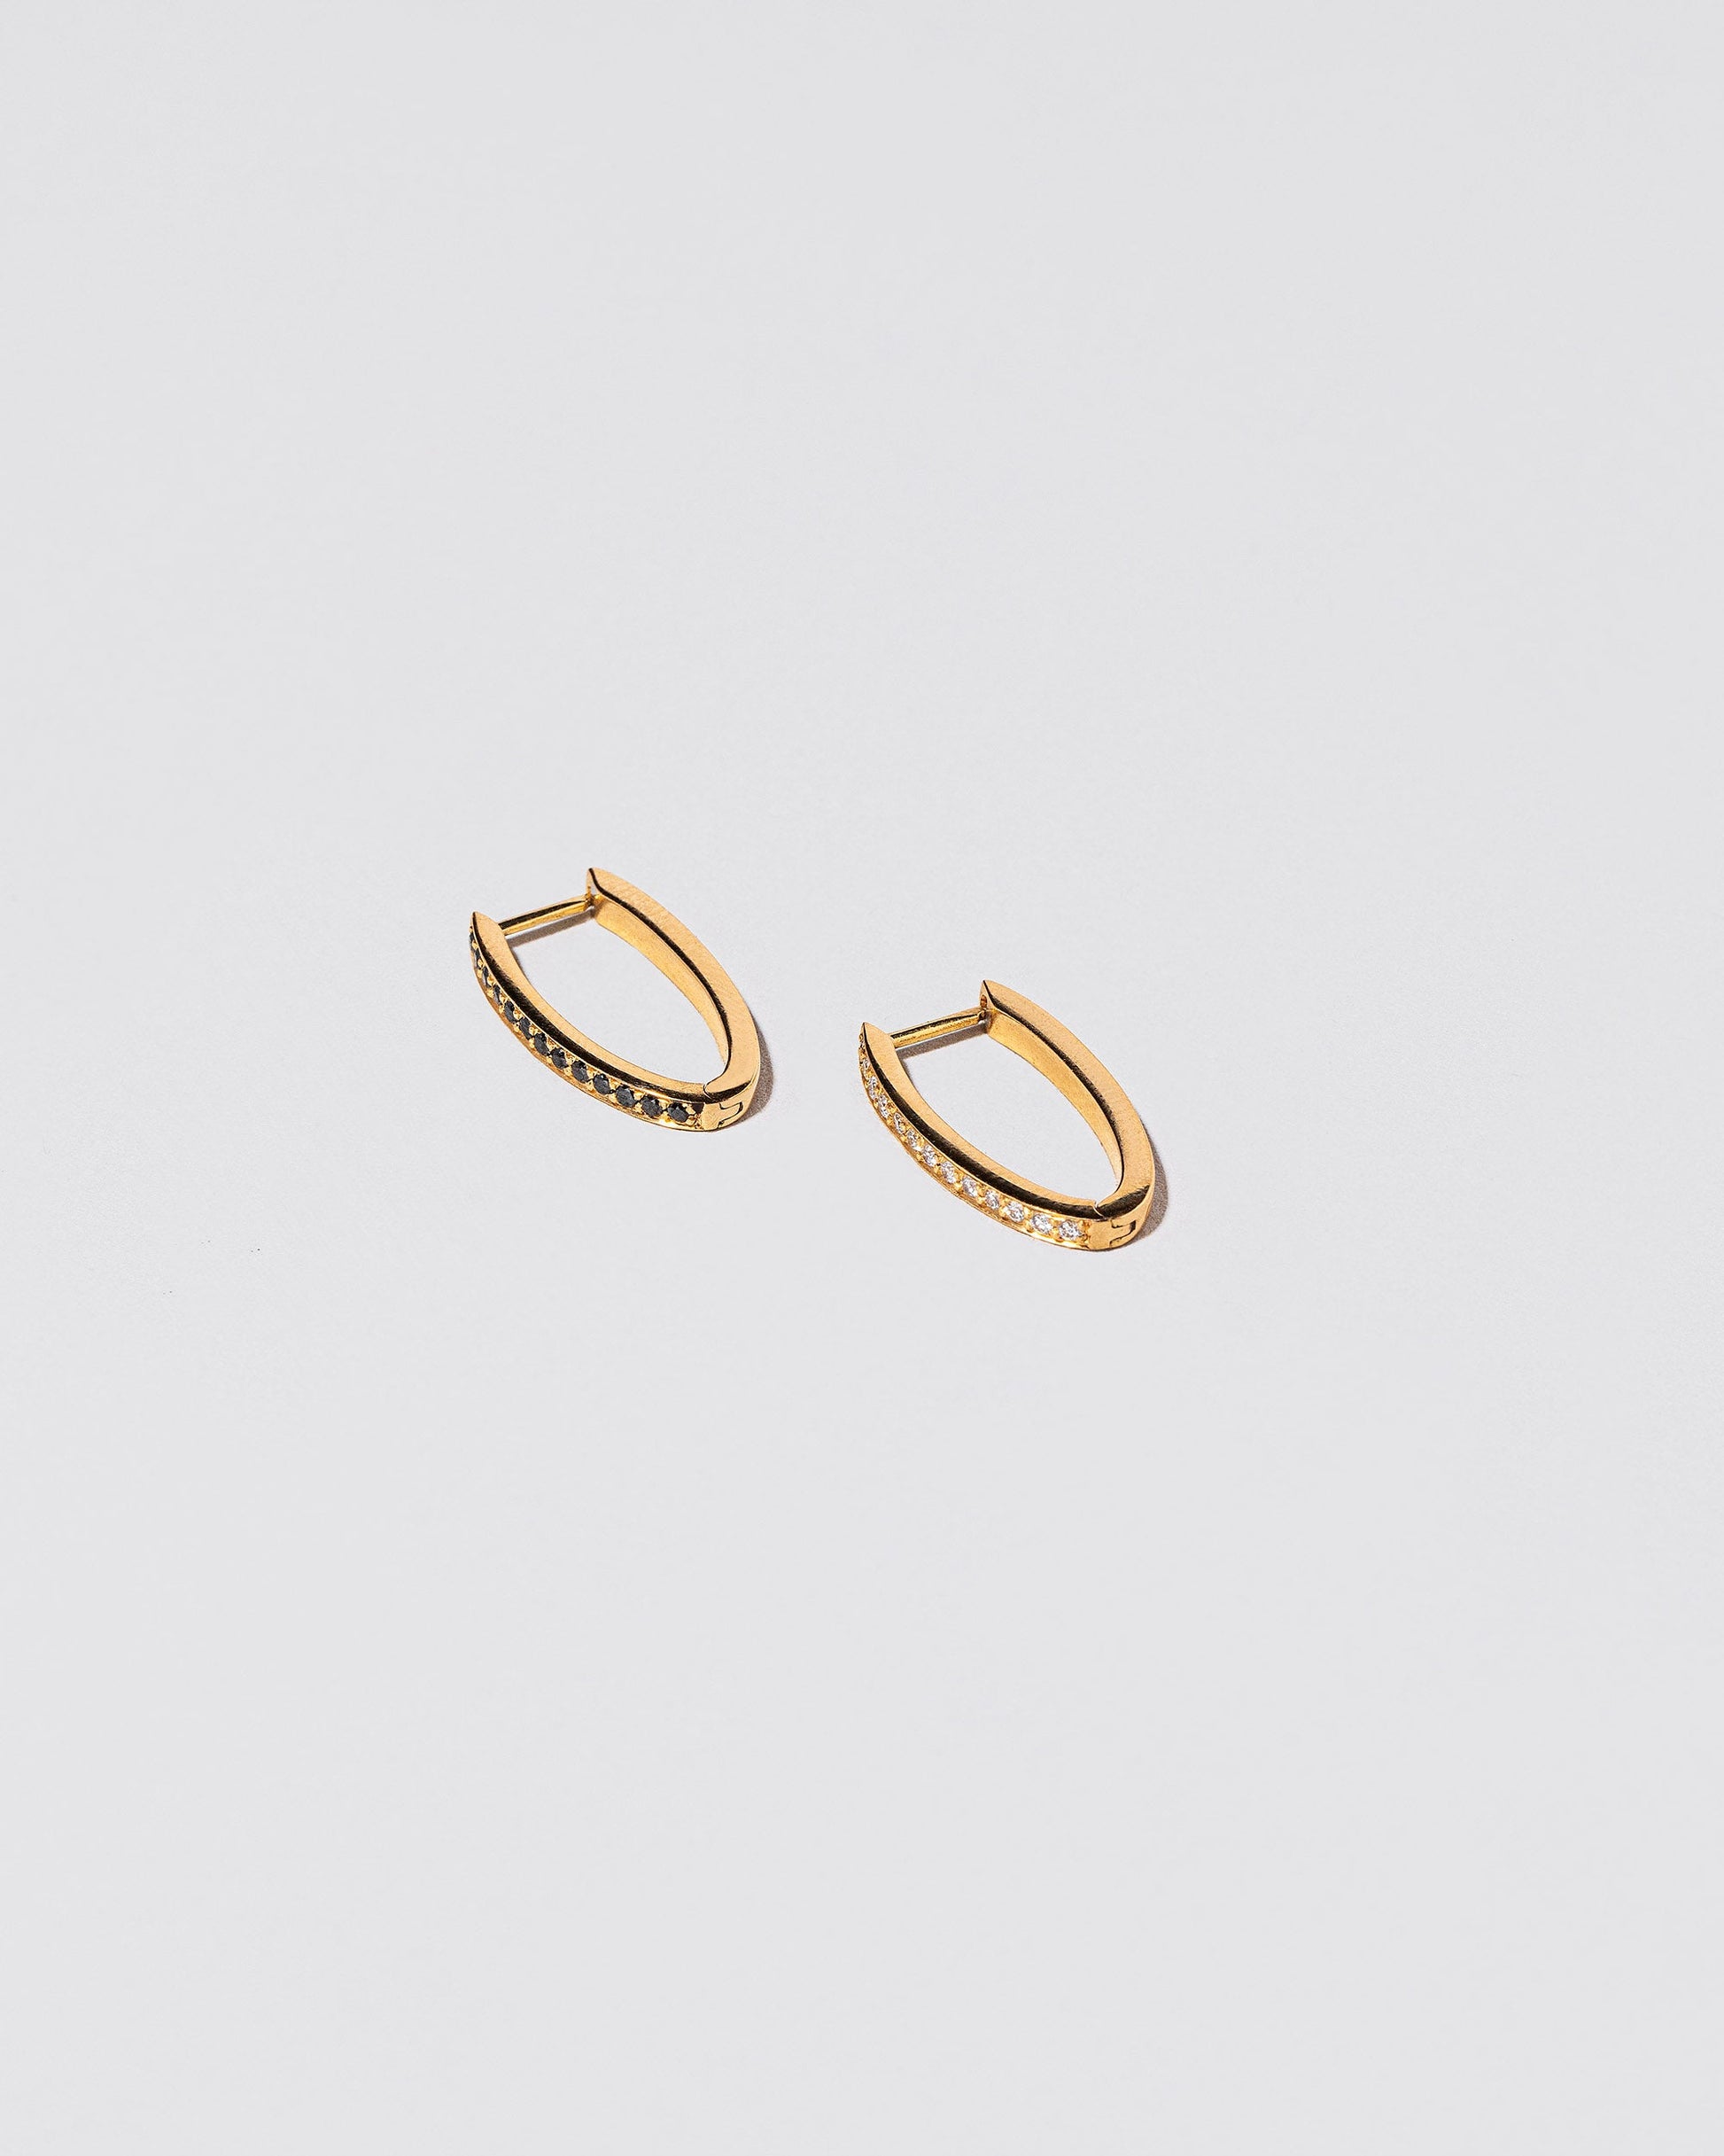 Tiny Loop Hoops on light colored background.